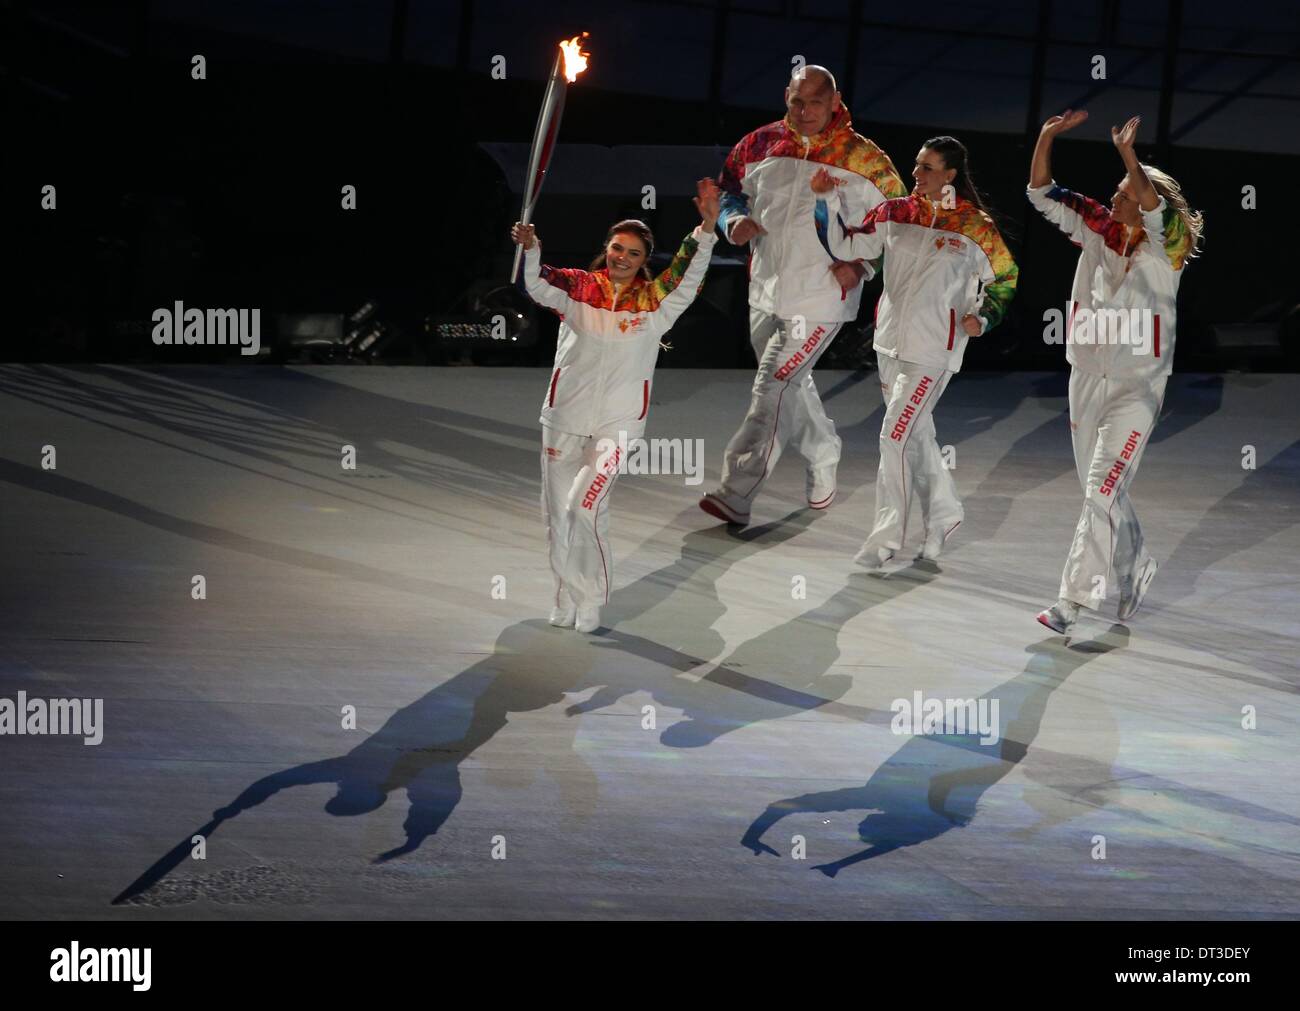 Sochi, Russia. 07 February 2014. Alina Kabaeva (L) of Russia carries the Olympic torch as Alexandr Karelin (2-L), Russian pole vaulter Yelena Isinbayeva (2-R) and tennis player Maria Sharapova of Russia follow during the Opening Ceremony in Fisht Olympic Stadium at the Sochi 2014 Olympic Games, Sochi, Russia, 07 February 2014. Photo: Christian Charisius/dpa in Fisht Olympic Stadium at the Sochi 2014 Olympic Games, Sochi, Russia, 07 February 2014. Photo: Christian Charisius/dpa/Alamy Live News Stock Photo